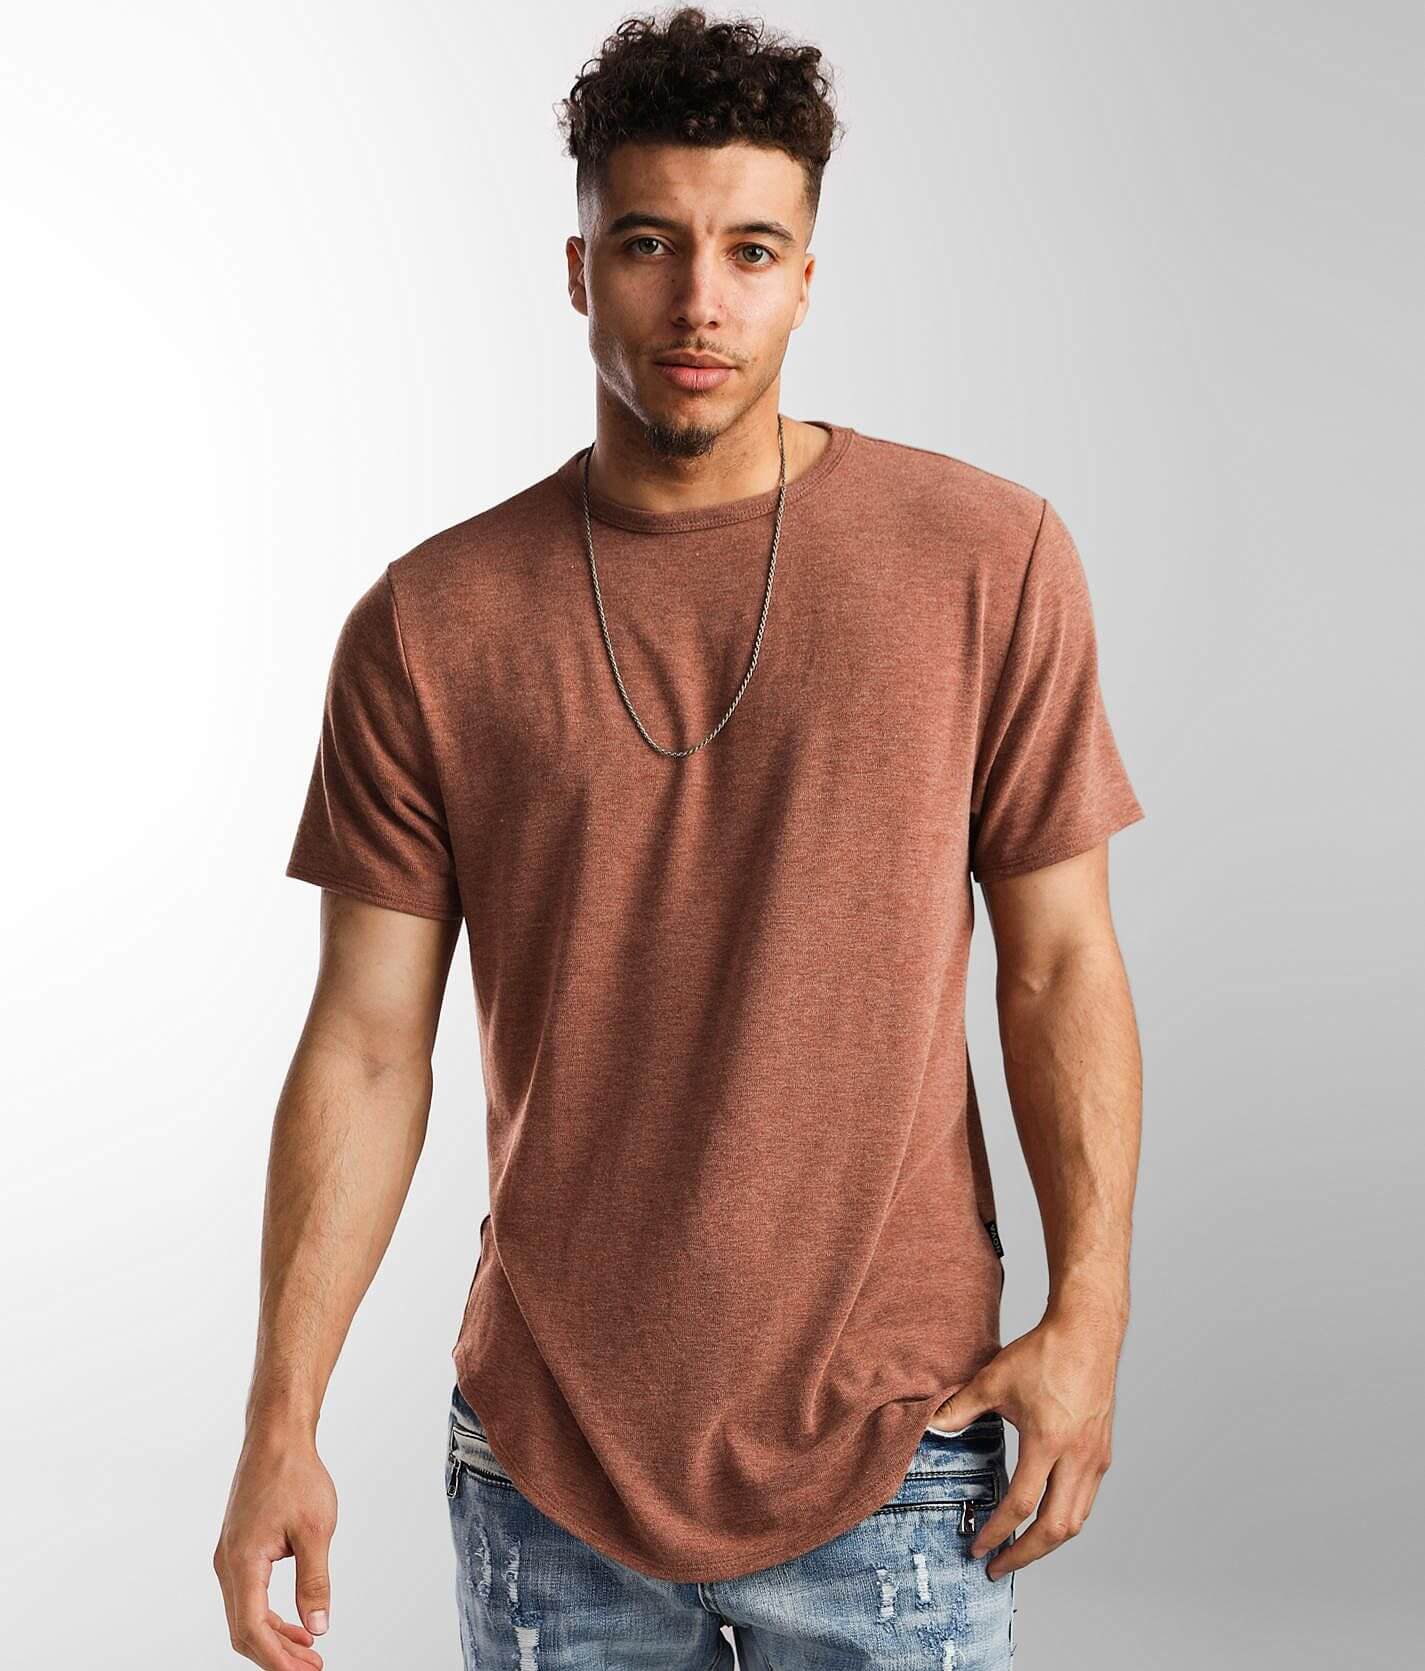 Nova Industries Textured Knit T-Shirt - Men's T-Shirts in Taupe